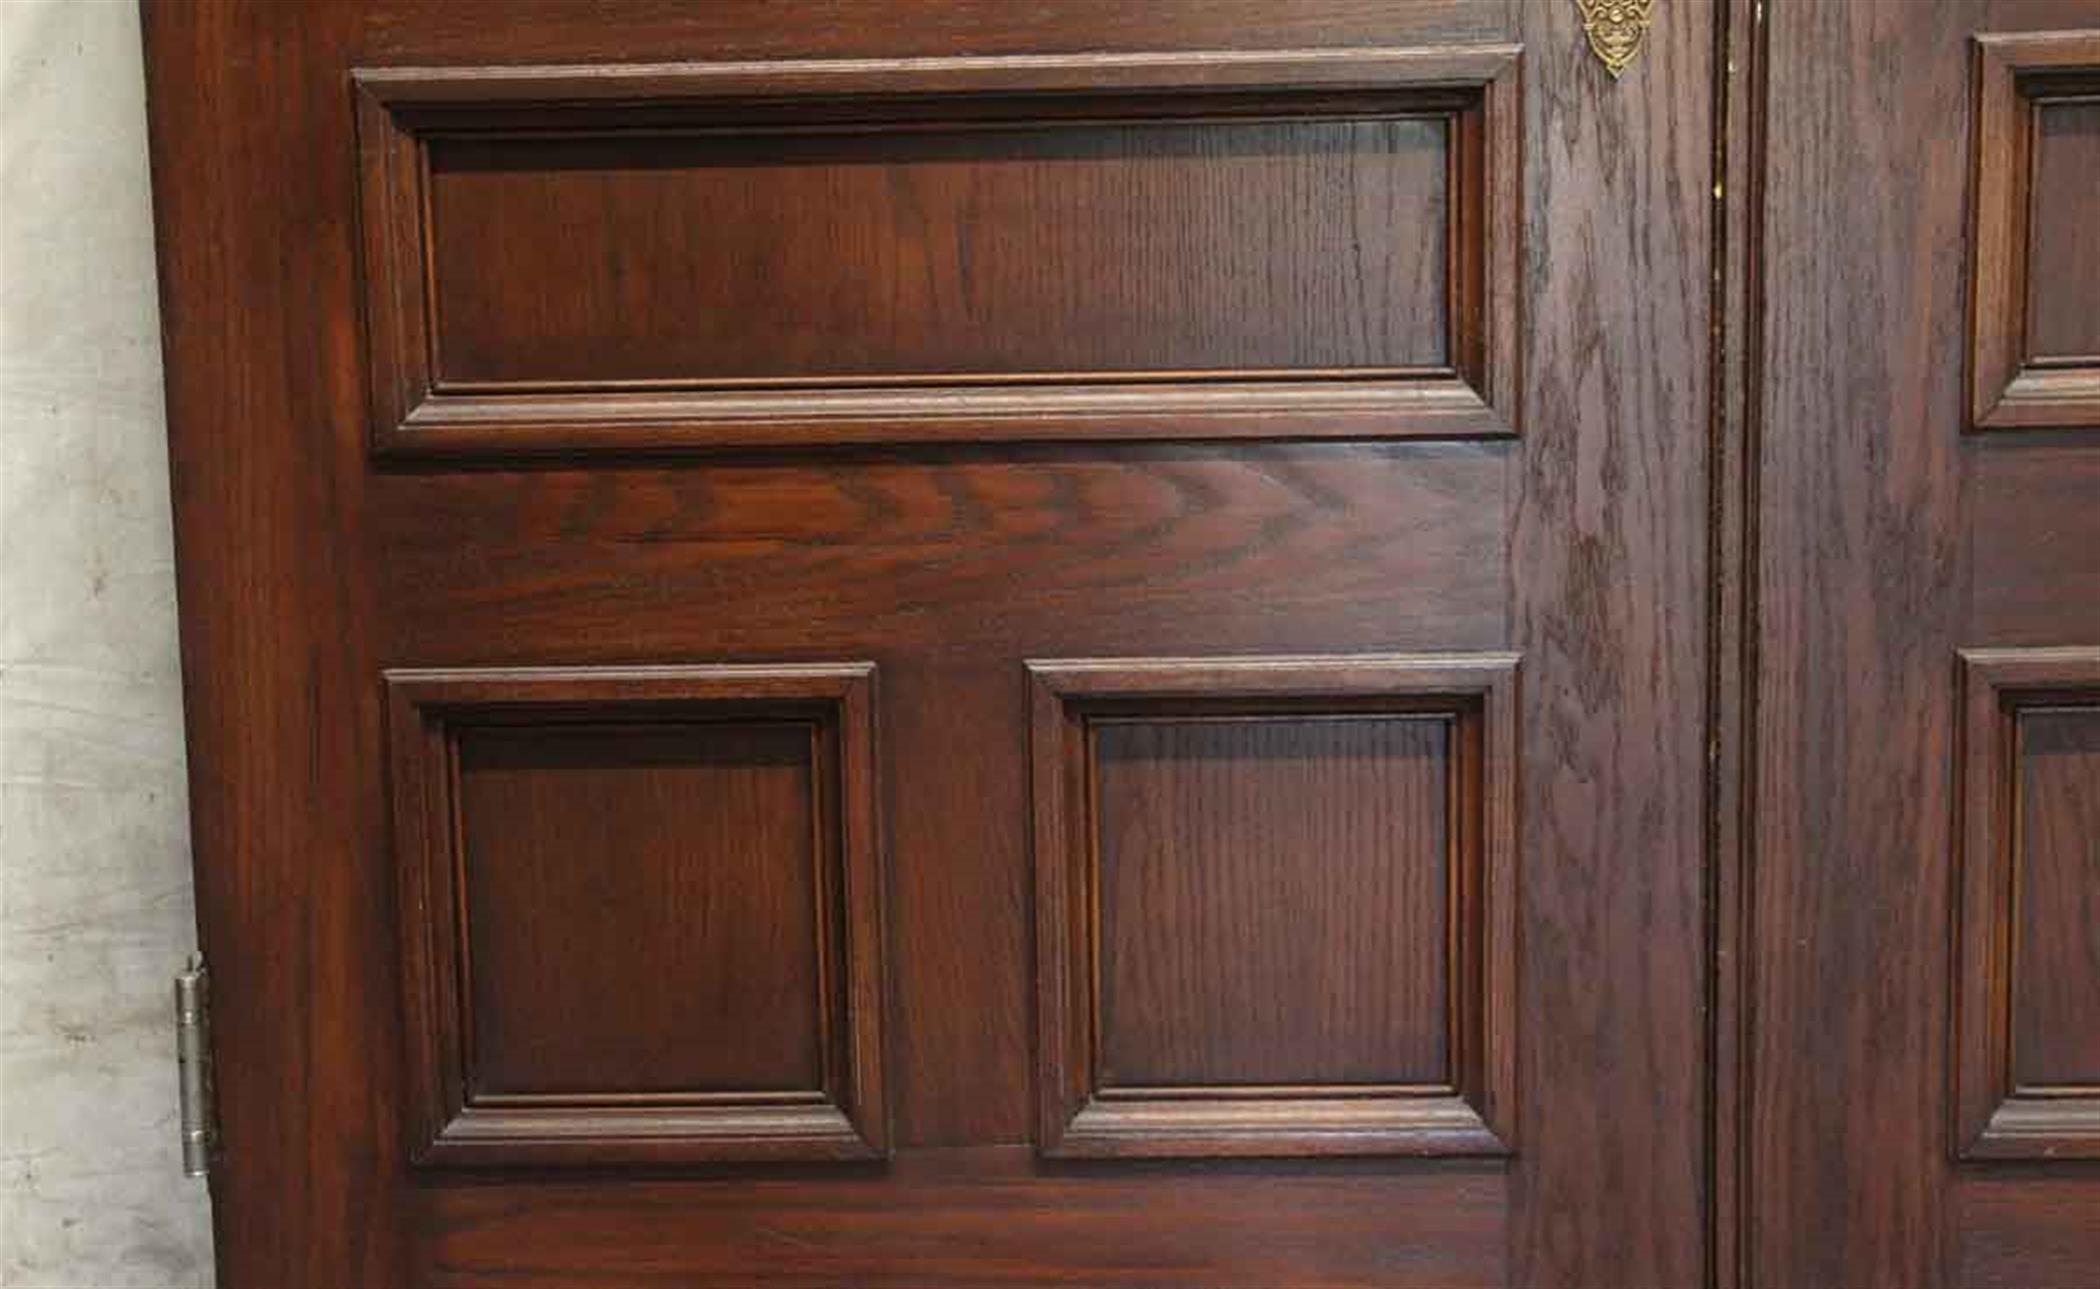 1890s brownstone doors made of American chestnut with rare original Victorian hardware lock set. Priced as a double. Very good condition. This can be seen at our 400 Gilligan St location in Scranton, PA.